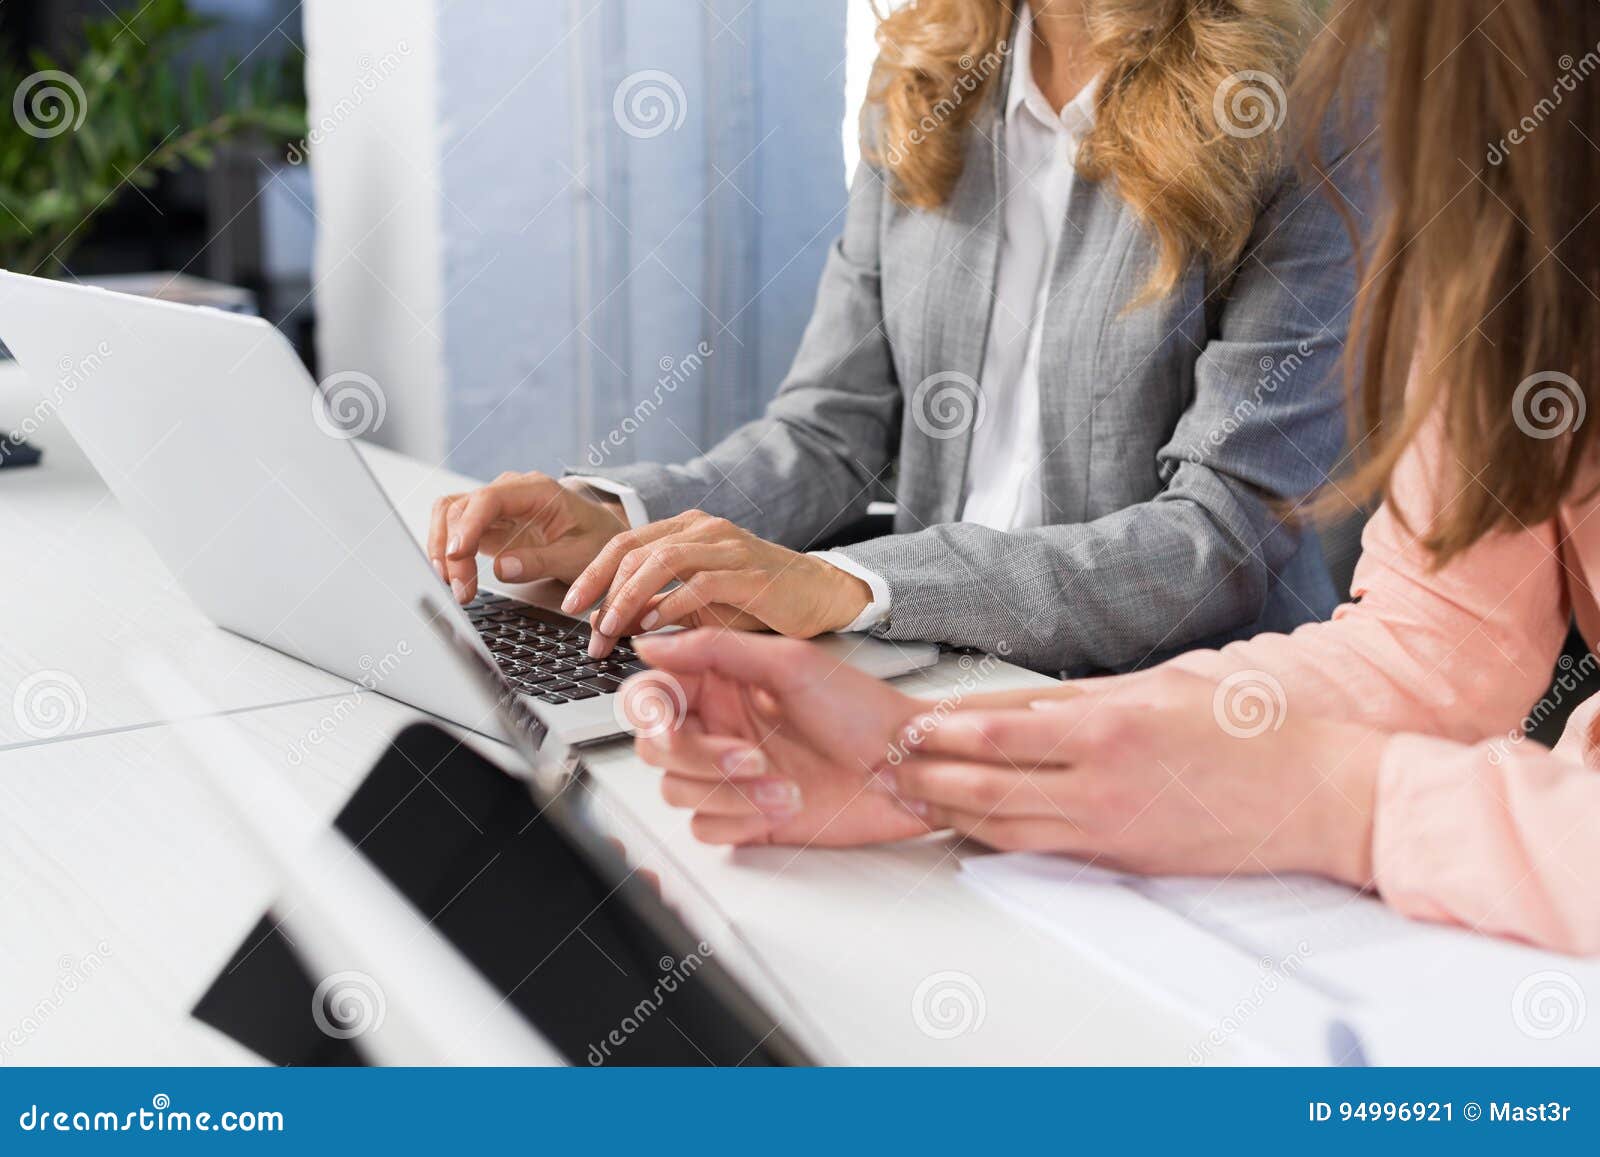 businesswomen use laptop computer typing on keyboard, teamwork concept, open space office two business women working on